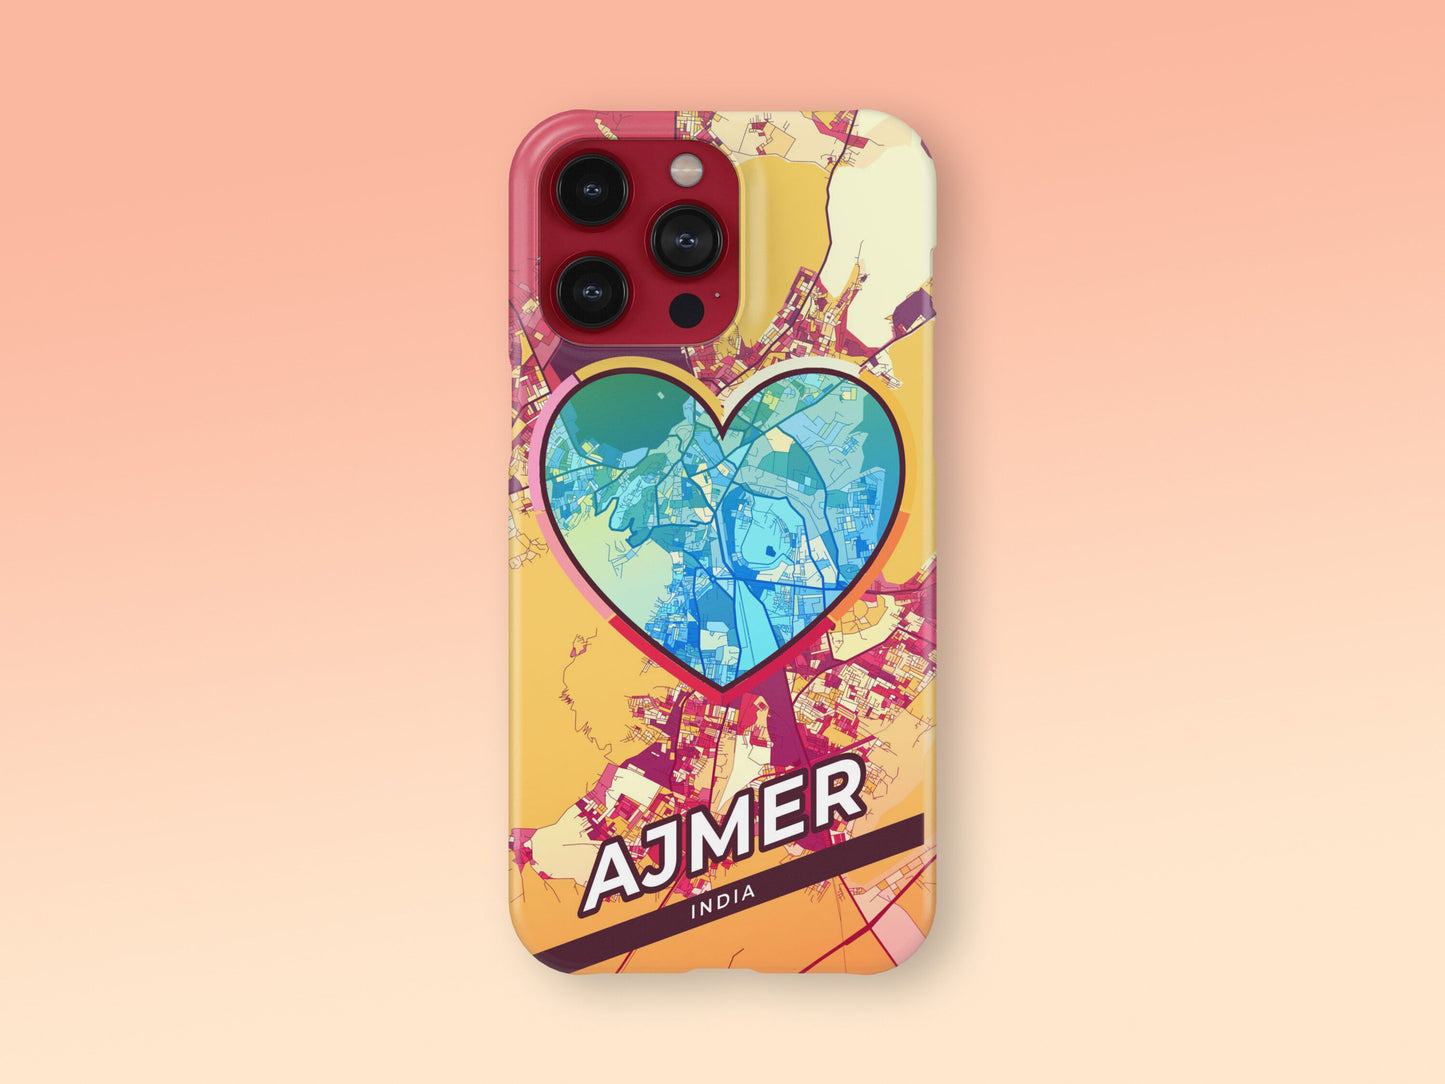 Ajmer India slim phone case with colorful icon. Birthday, wedding or housewarming gift. Couple match cases. 2